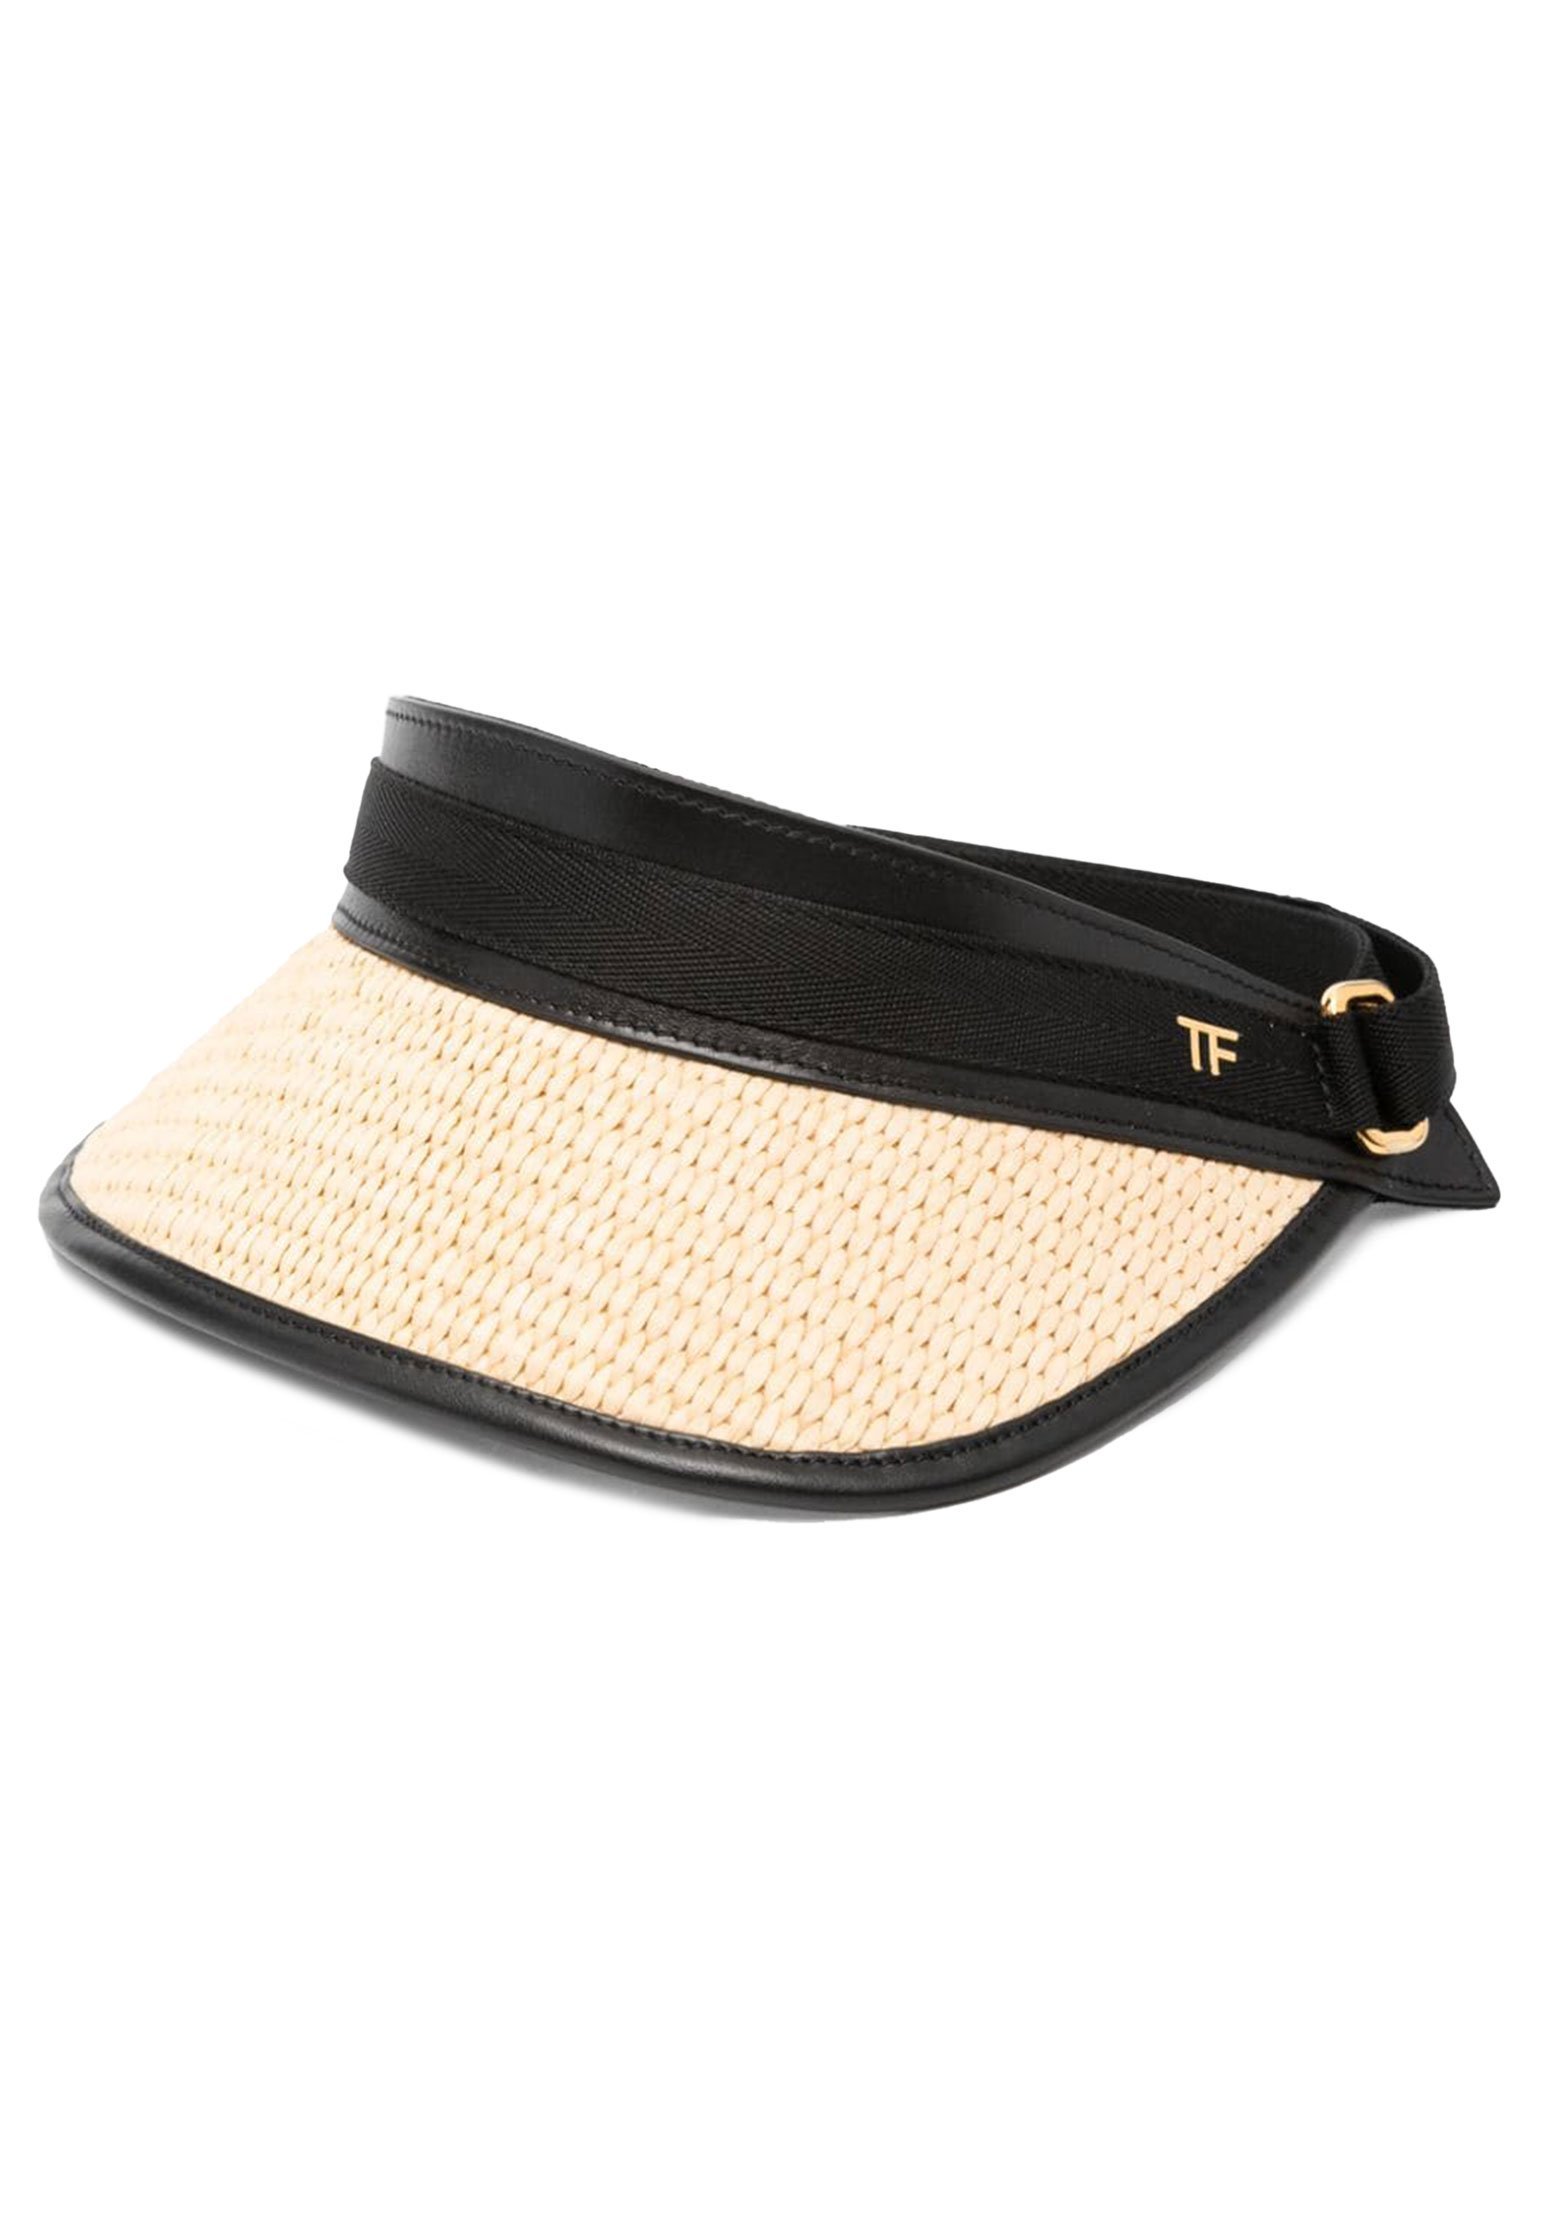 Cap TOM FORD Color: beige (Code: 2994) in online store Allure